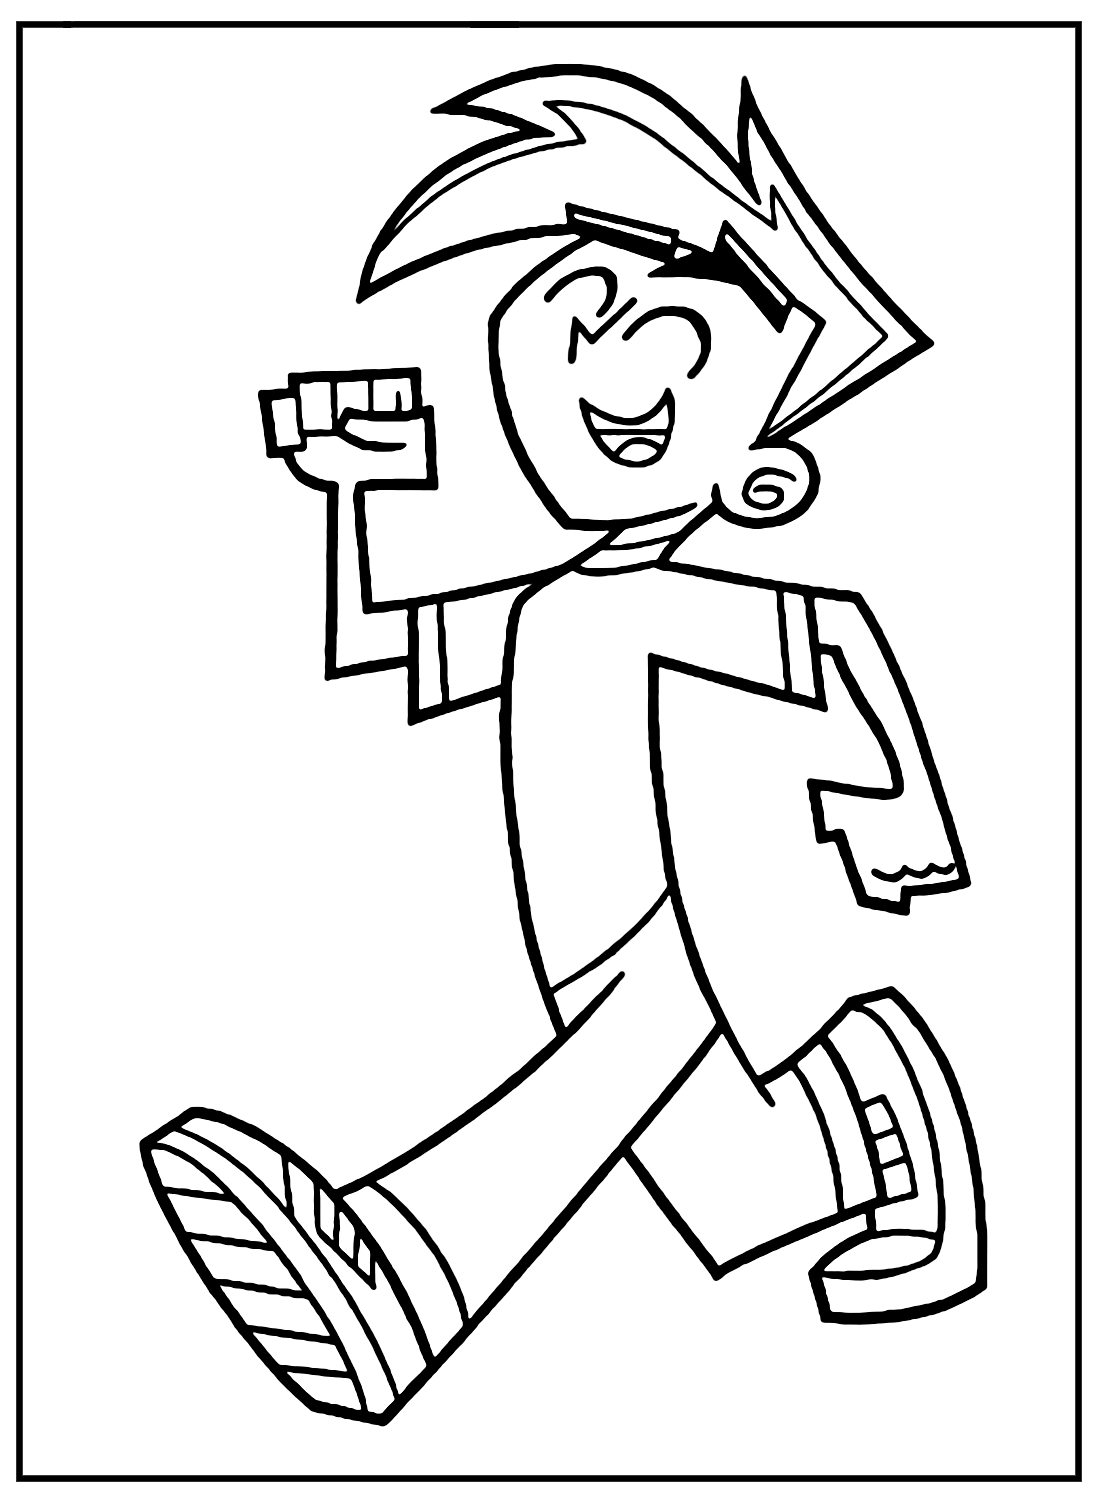 Danny Phantom Running Coloring Pages